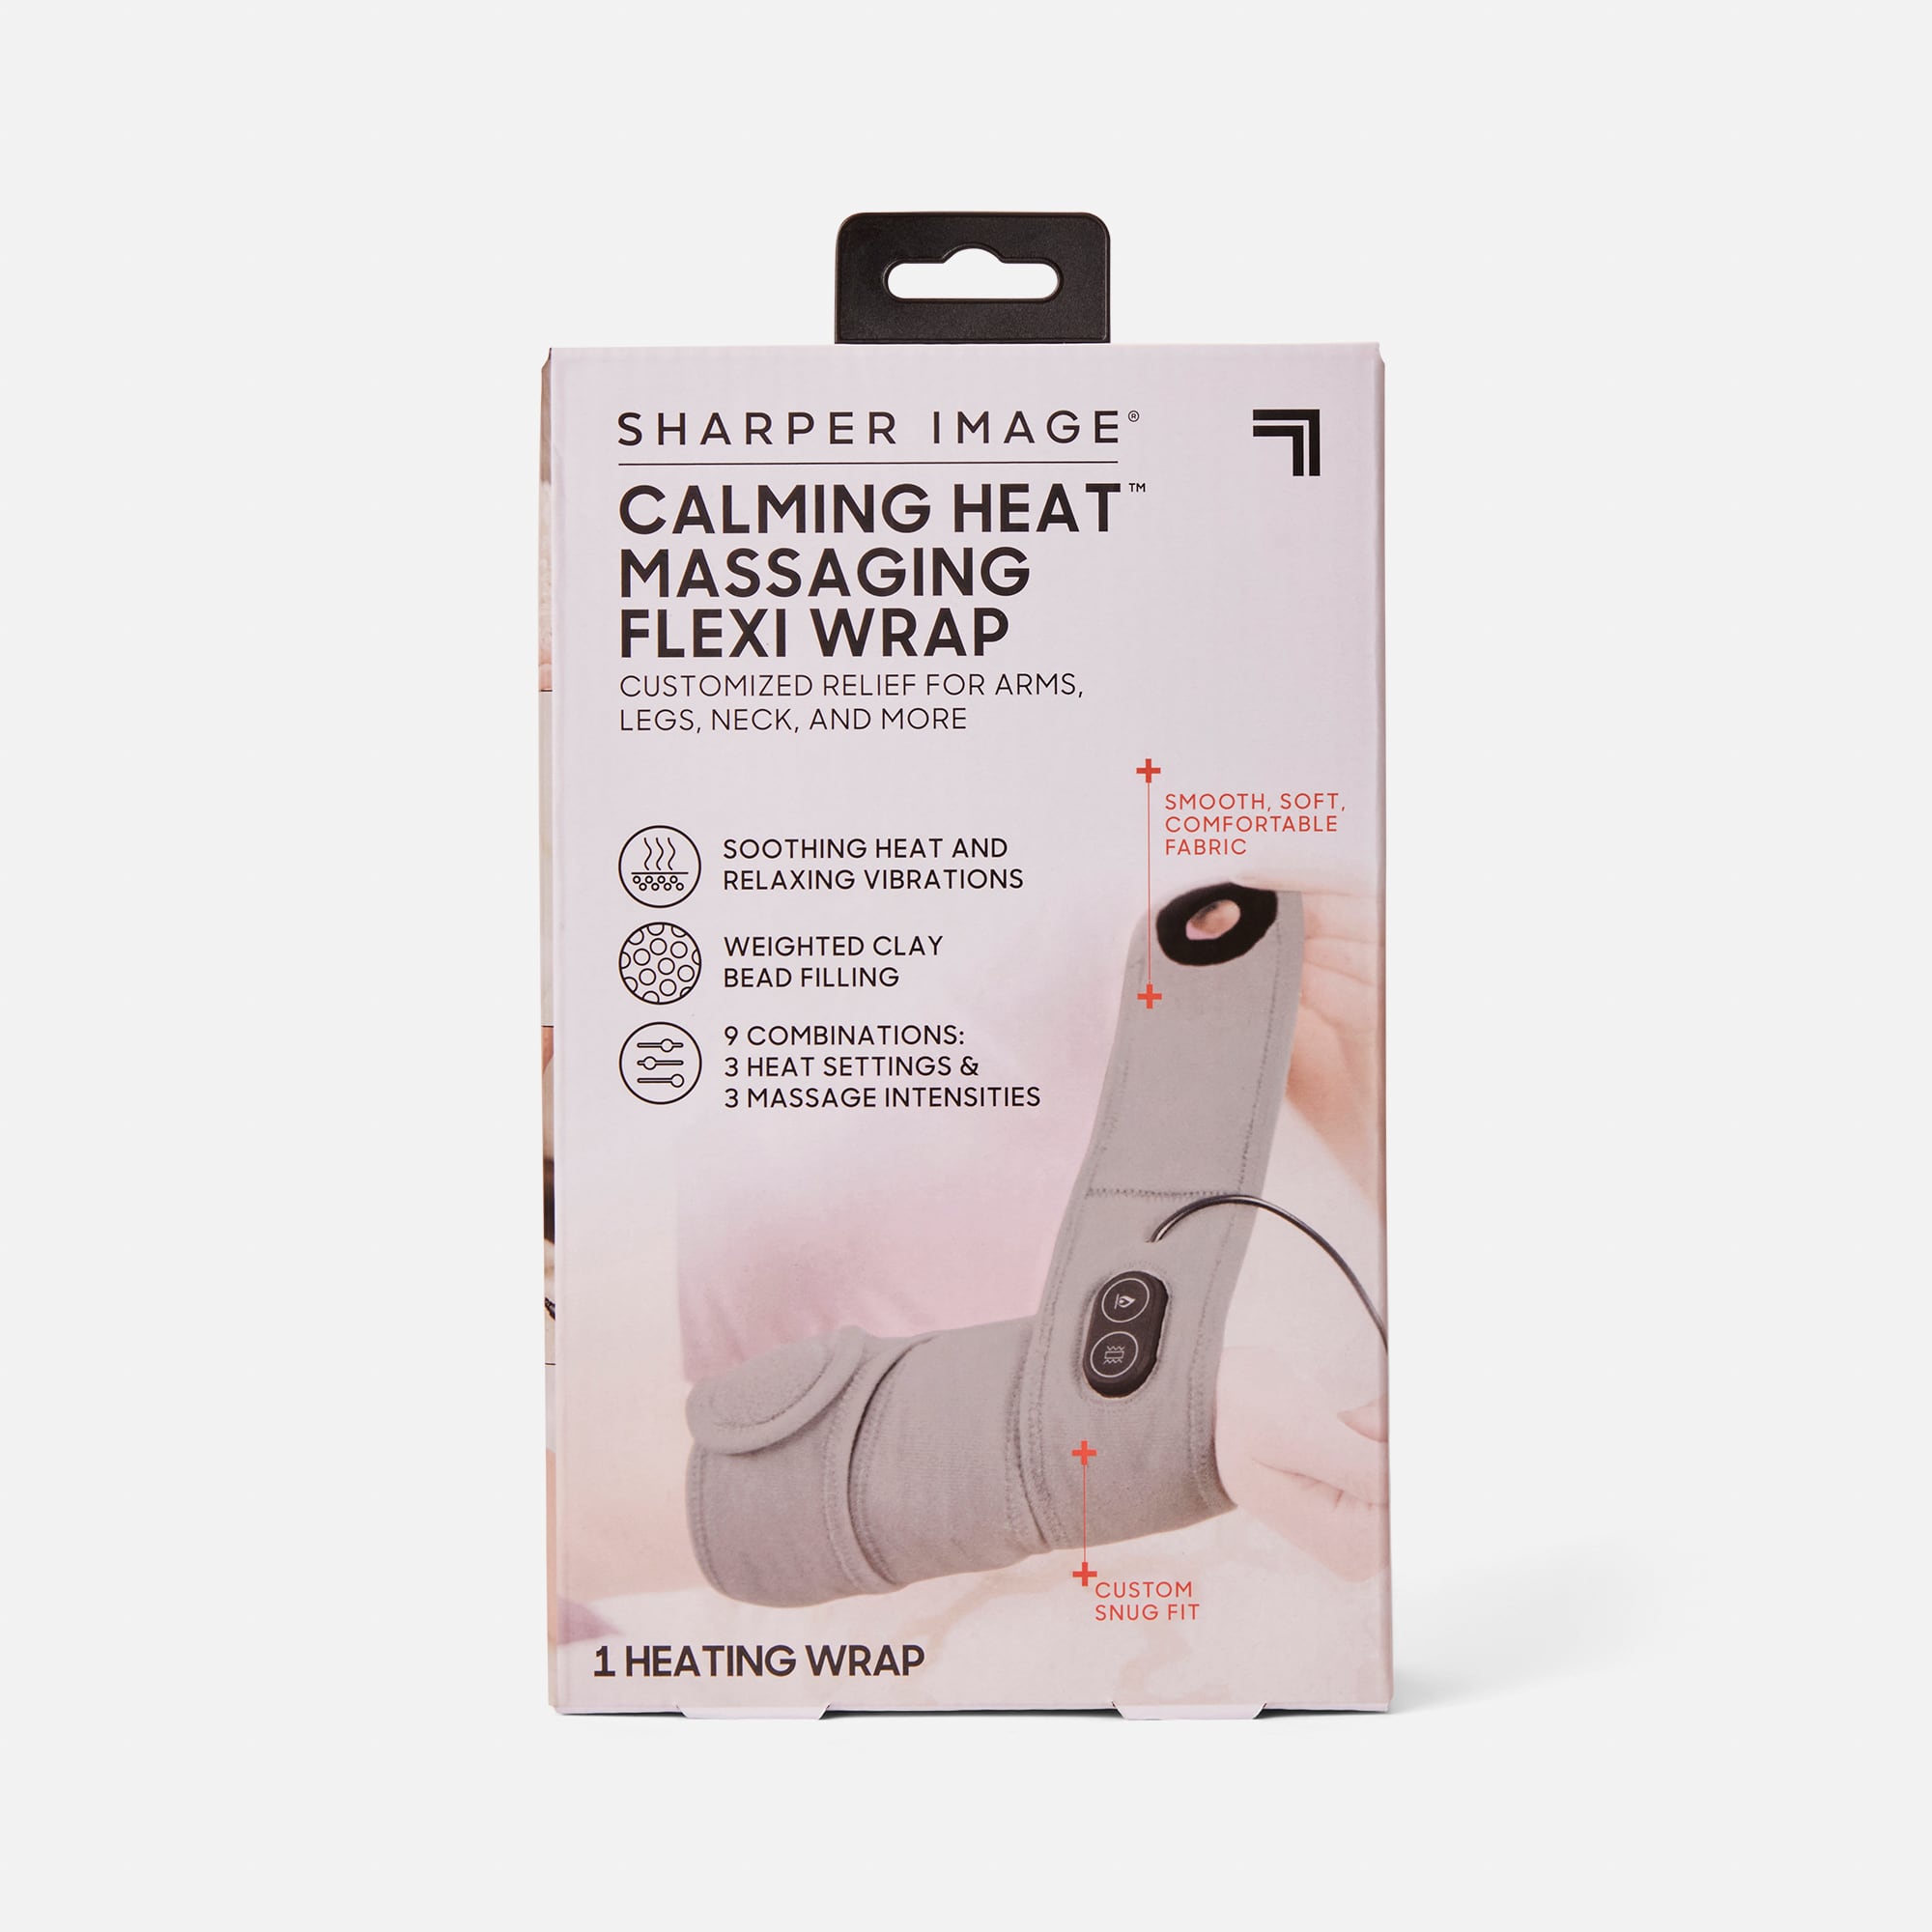 Calming Heat Neck Wrap by Sharper Image Personal Electric Neck Heating Pad  with Vibrations, 3 Heat & 3 Vibration Settings- 9 Relaxing Combinations